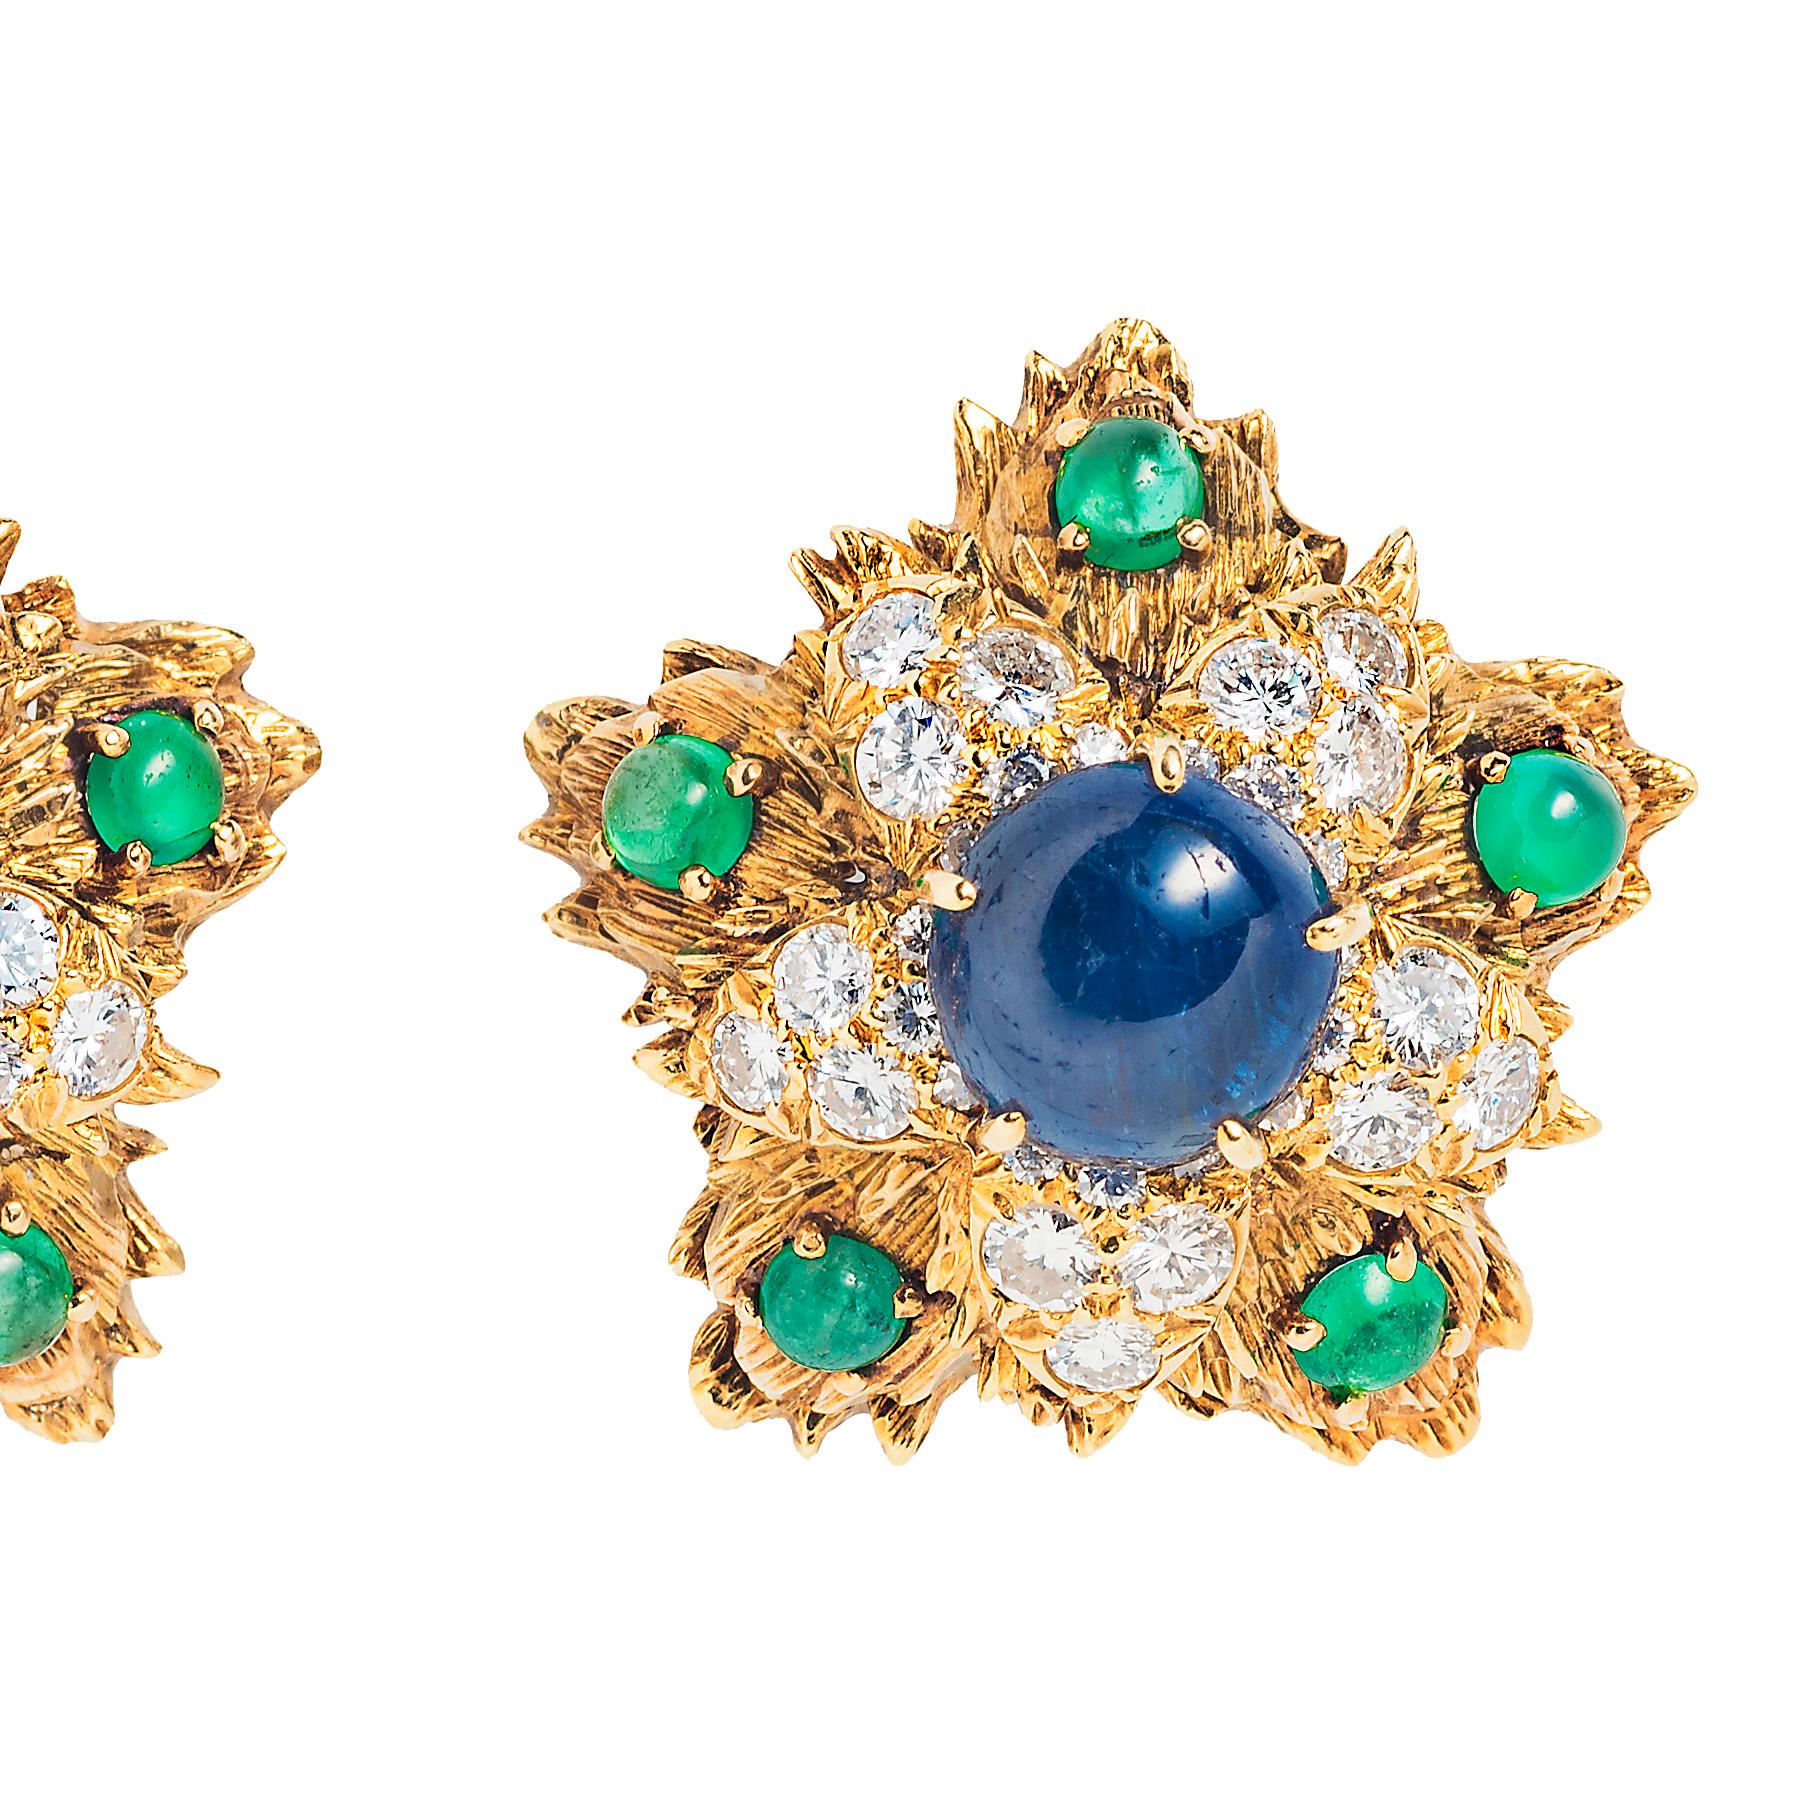 It’s the unique pairing of color and cut that makes these David Webb ear clips stand out. A large central cabochon sapphire is surrounded by faceted diamonds finished off with bright cabochon emeralds.

0.81” in diameter 
Approximately 9.39 carats